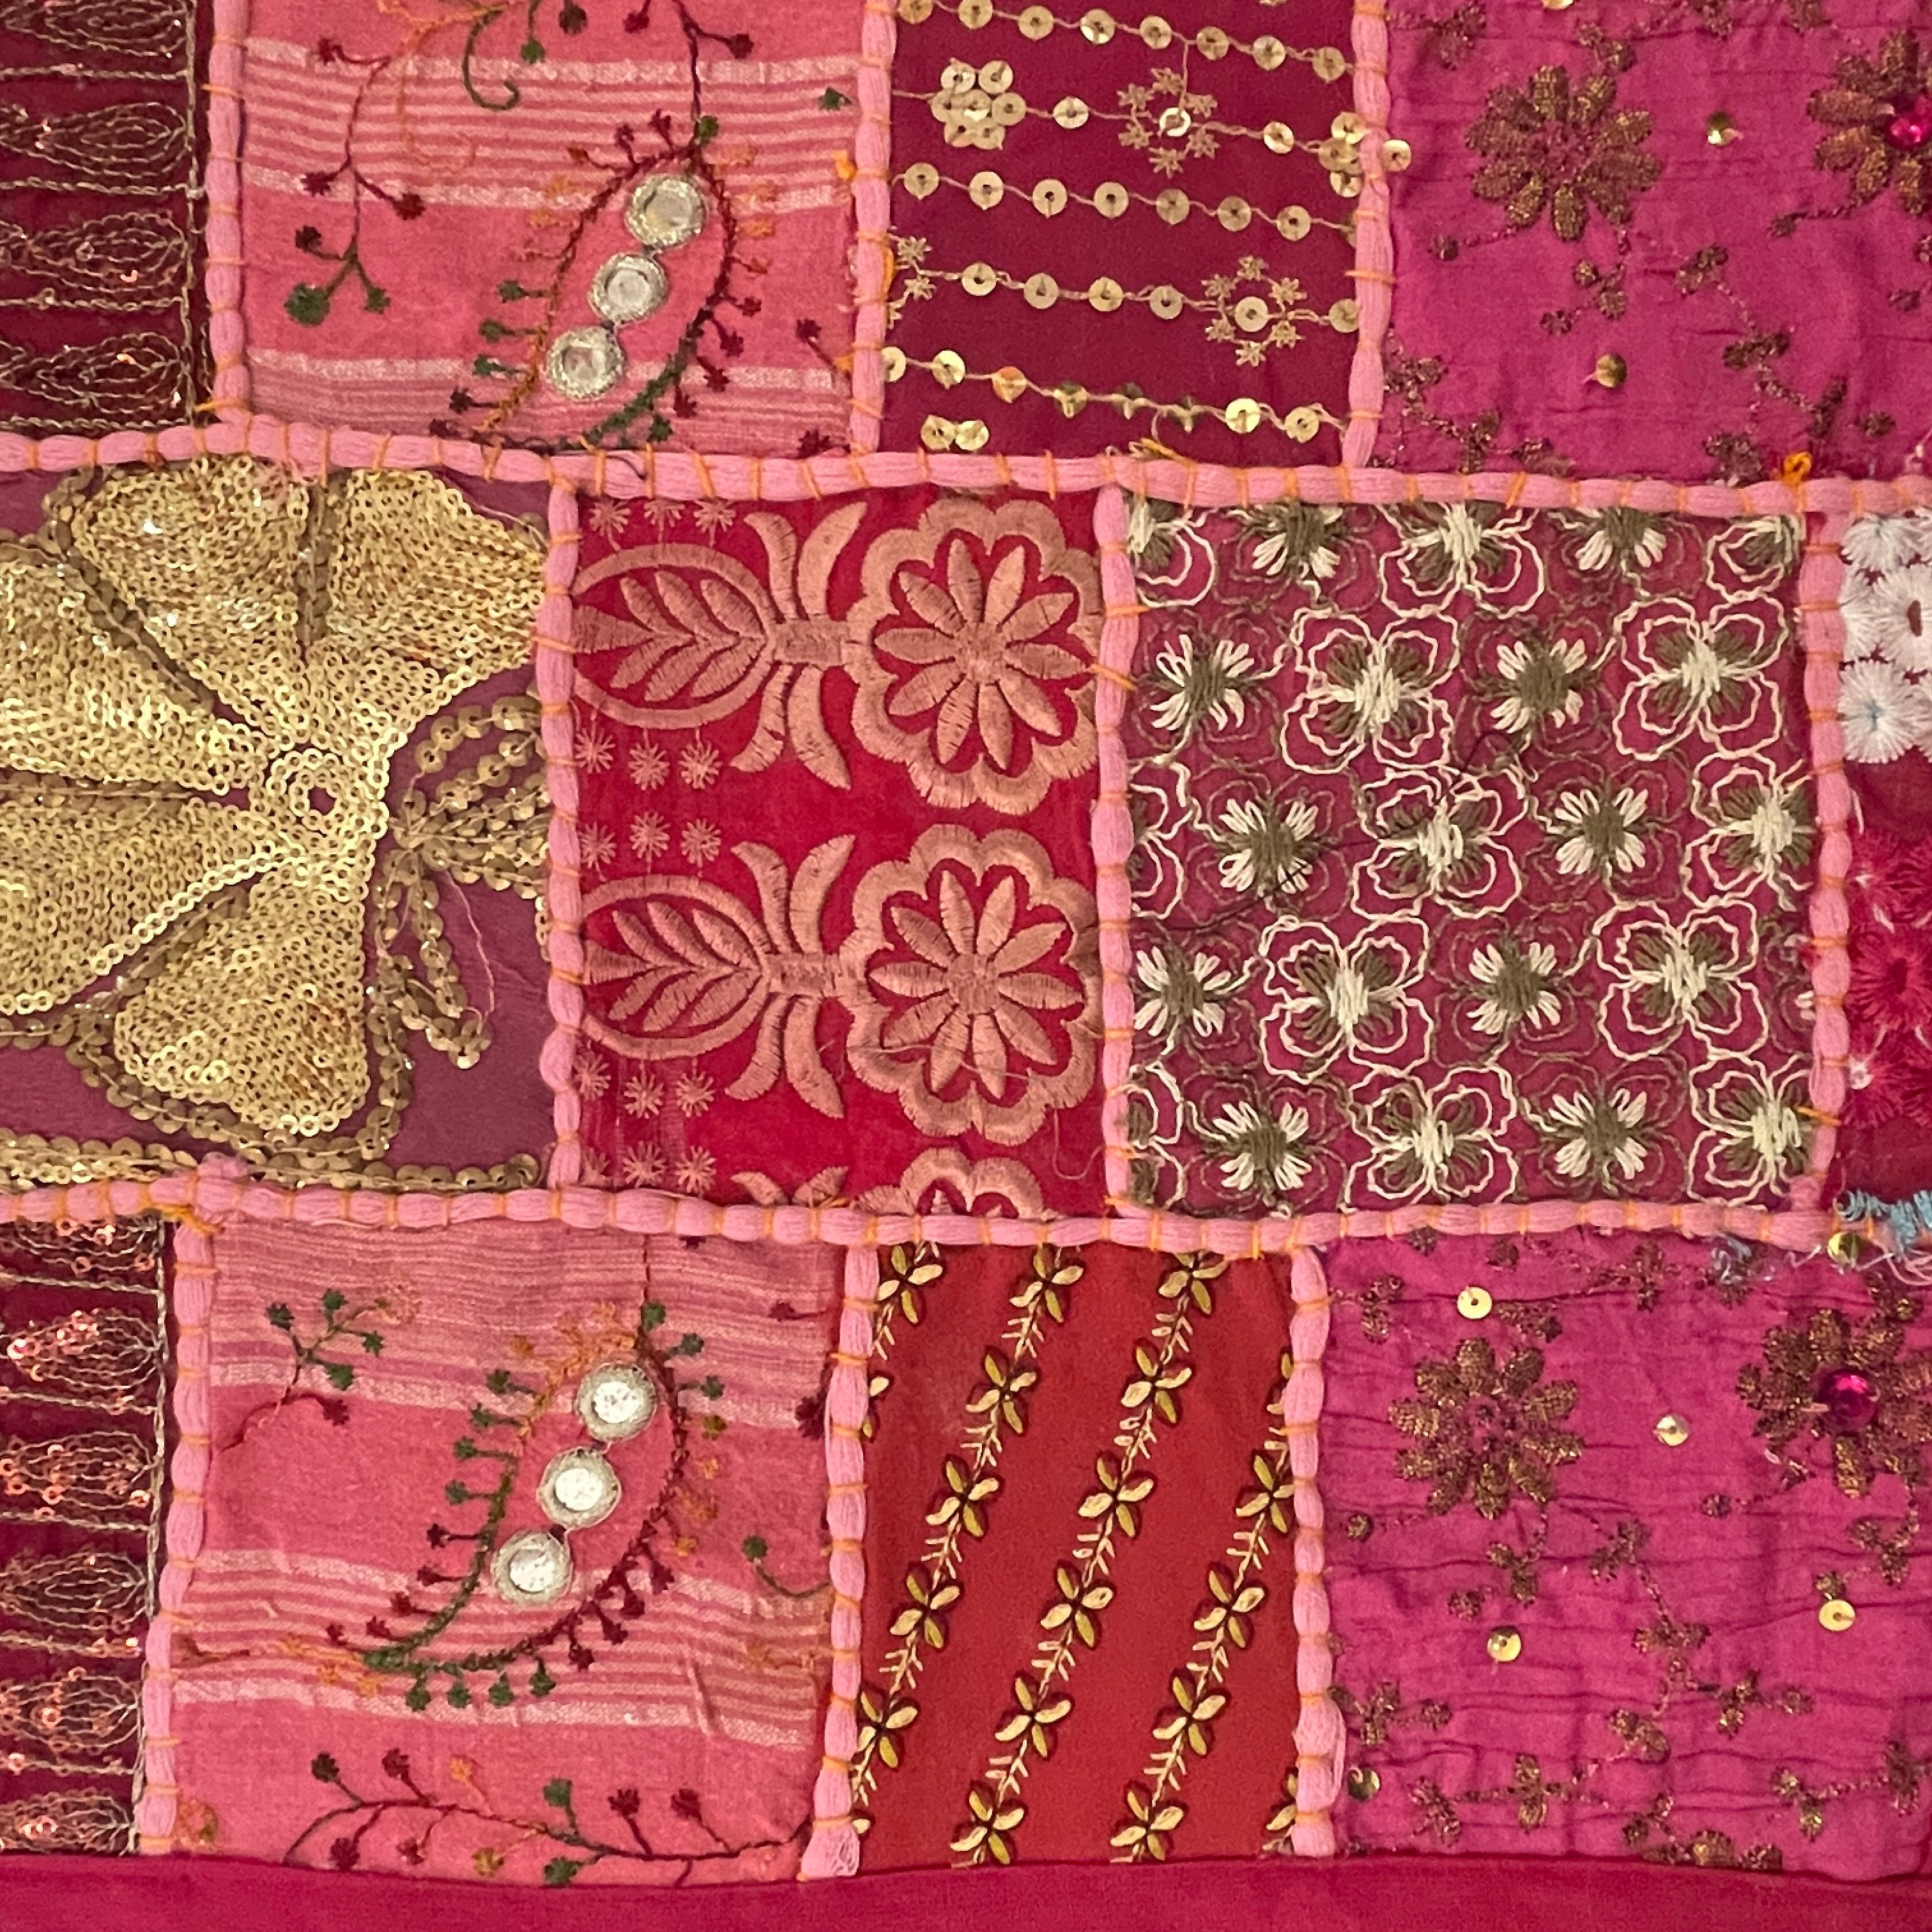 Handmade Dark Pink Patchwork Pillowcovers - 3 Styles - Vintage India NYC